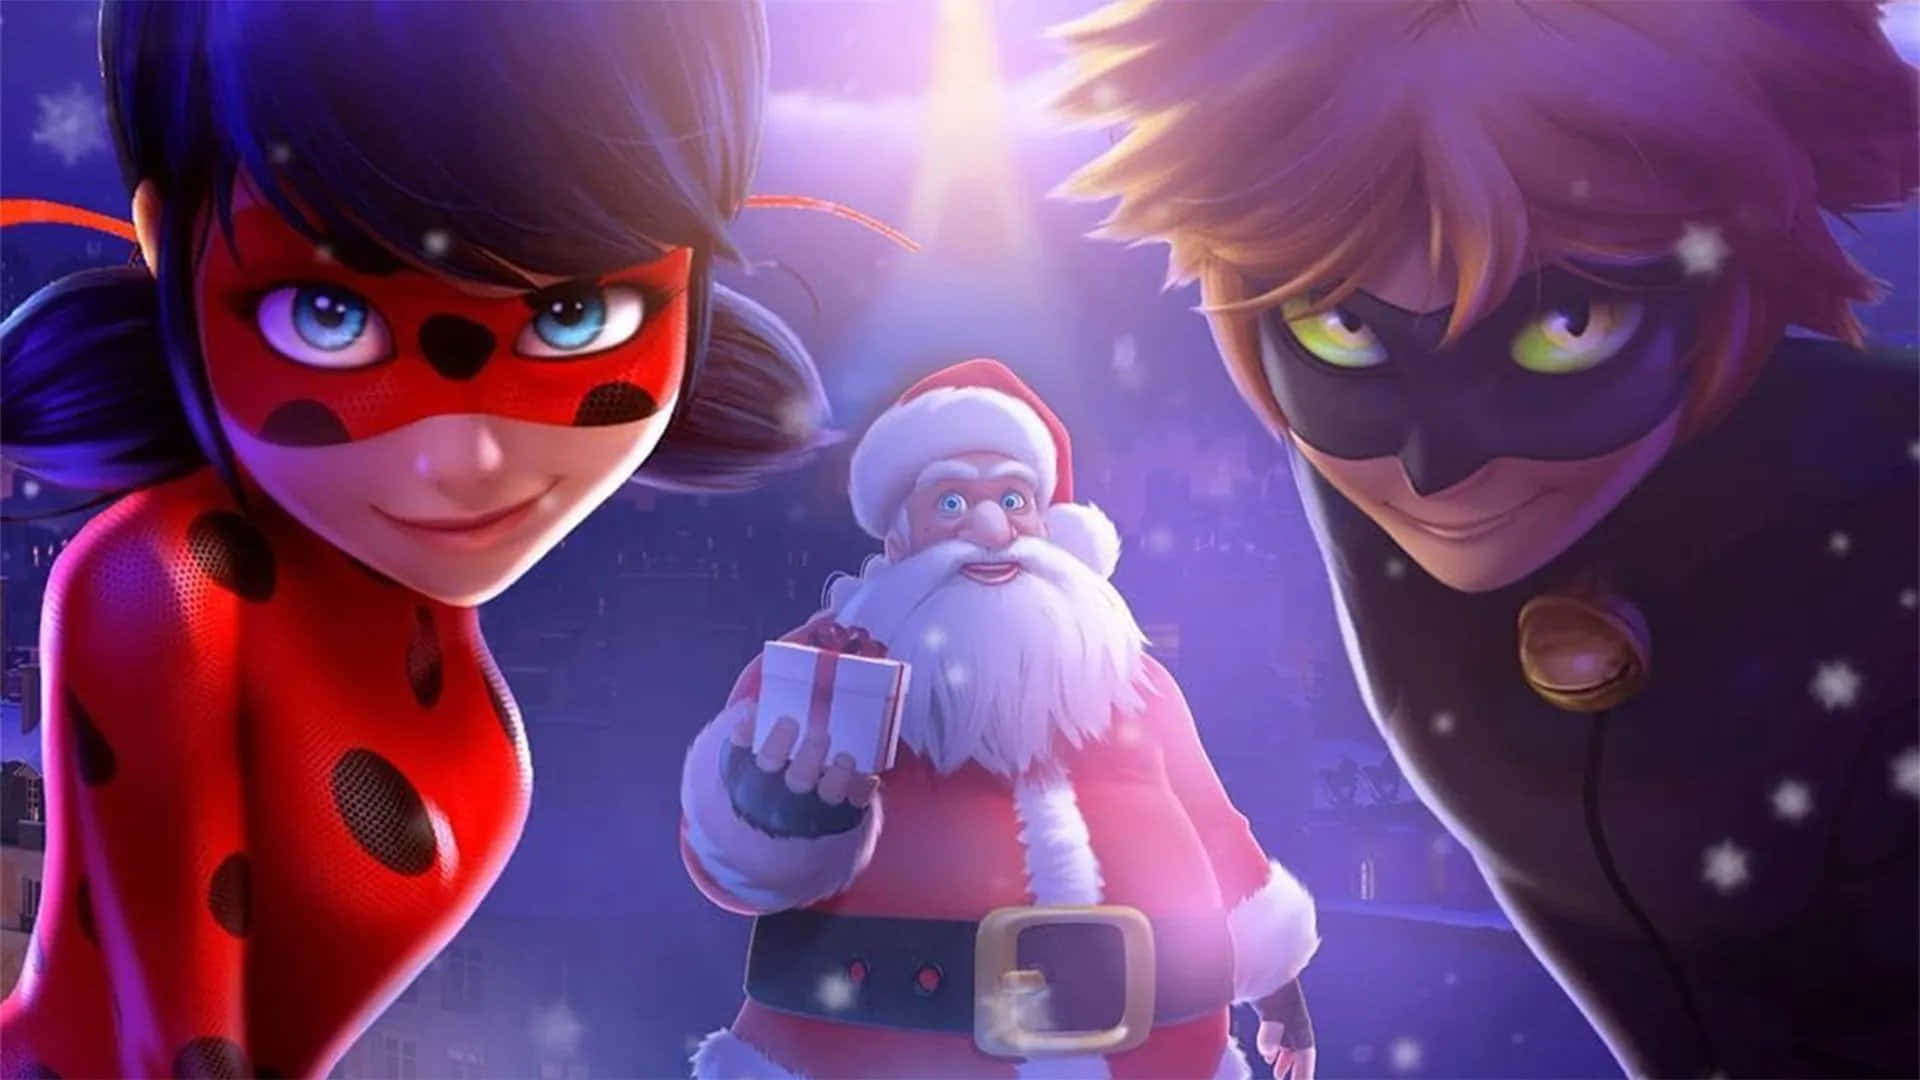 Ladybug, Cat Noir, and their Miraculous Save the Day